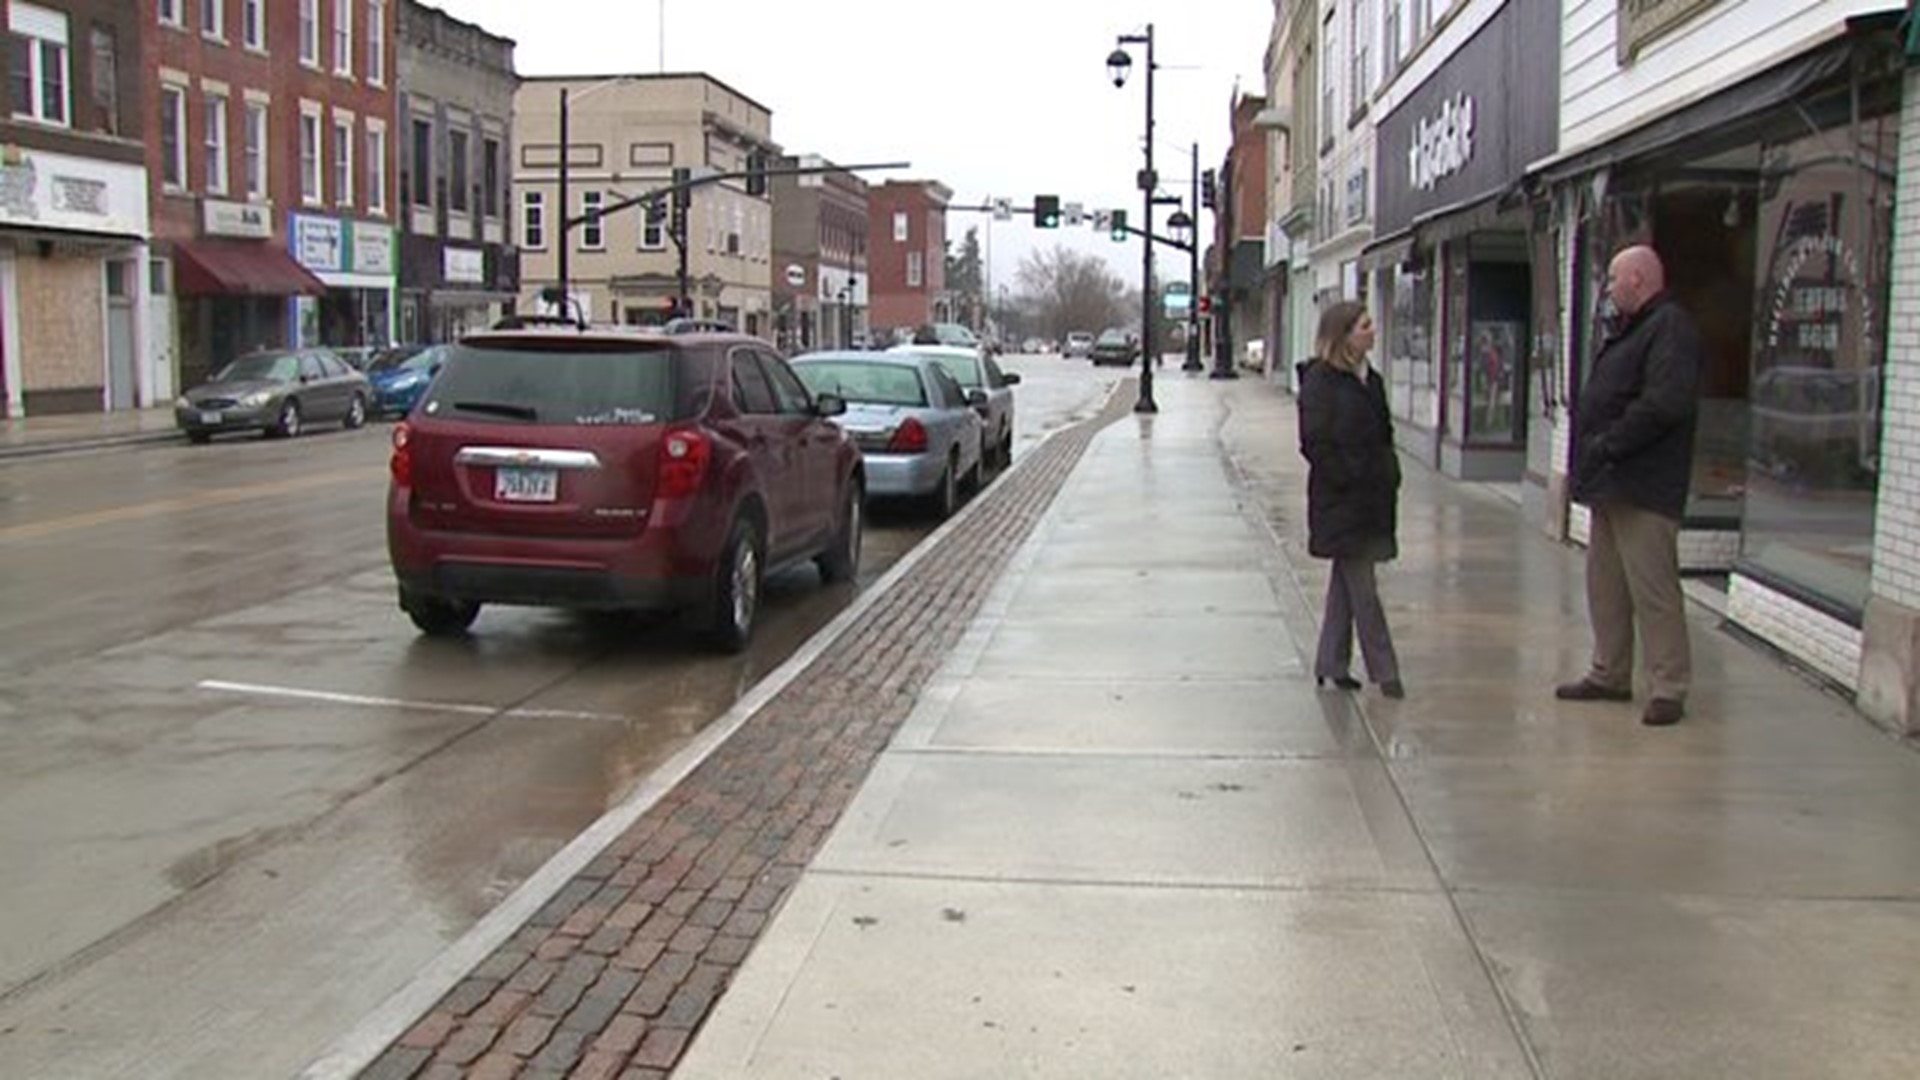 Downtown Maquoketa continues to grow after 2008 fire